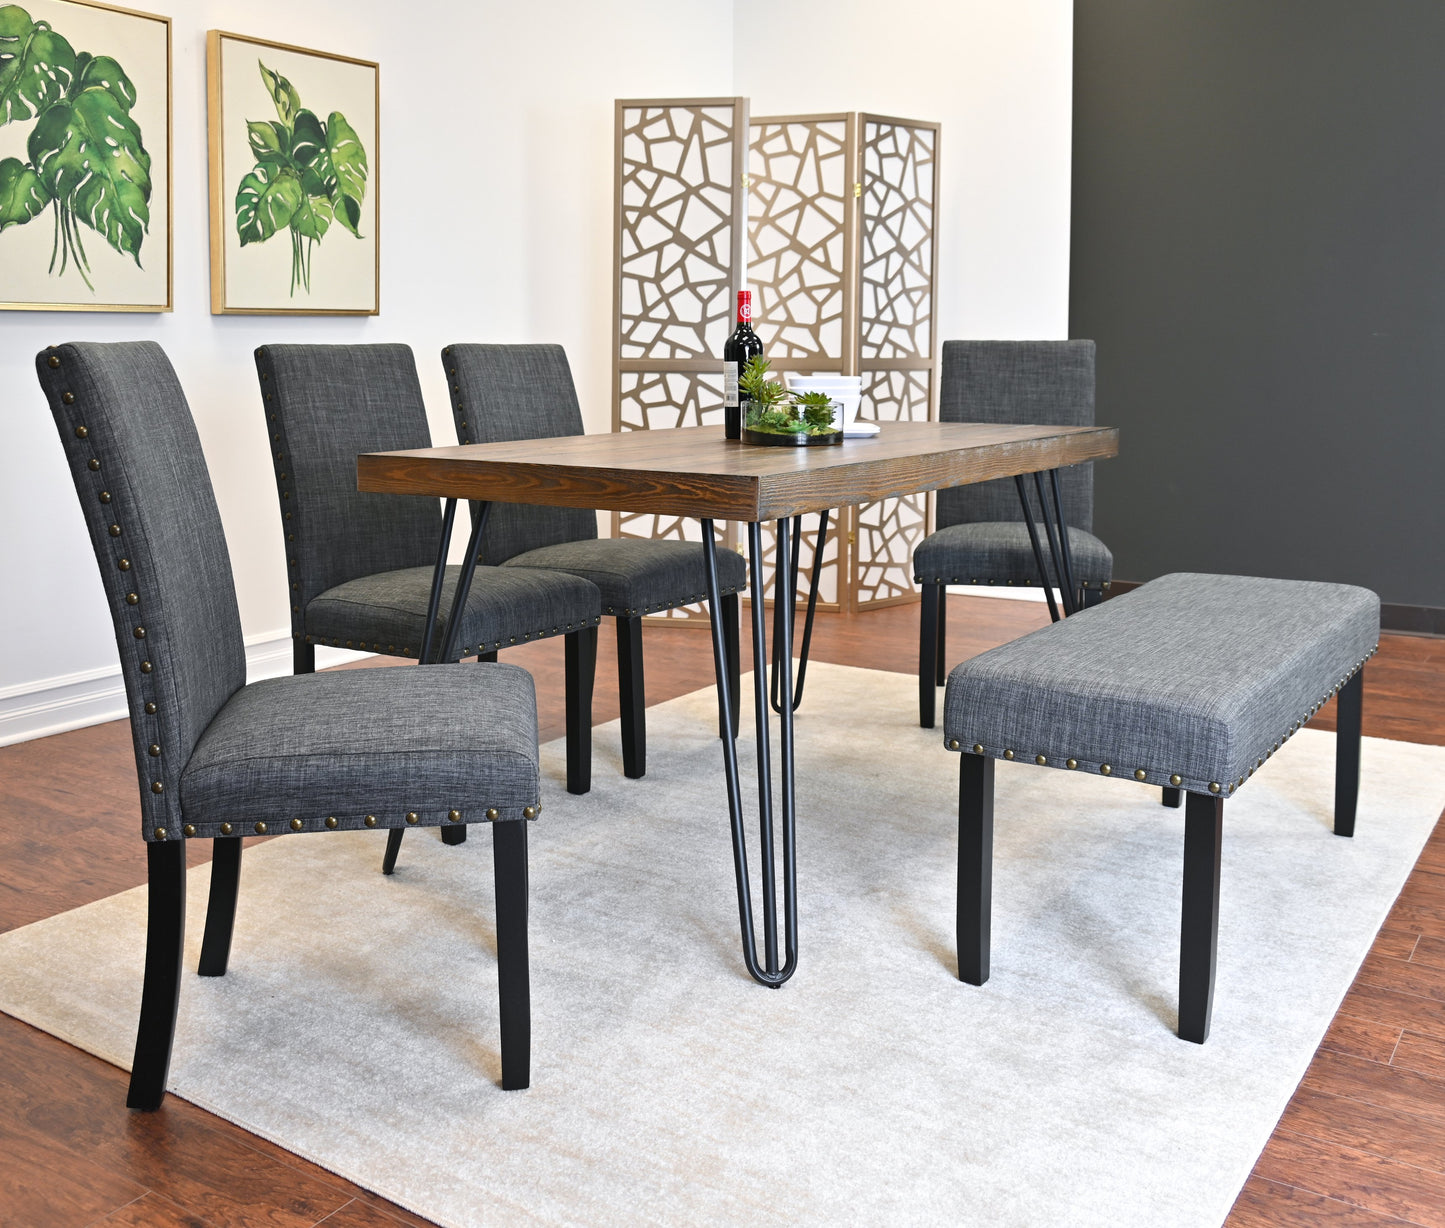 Amisos 6-Piece Dining Set, Hairpin Dining Table with 4 Chairs and Upholstery Bench, 3 Color Options